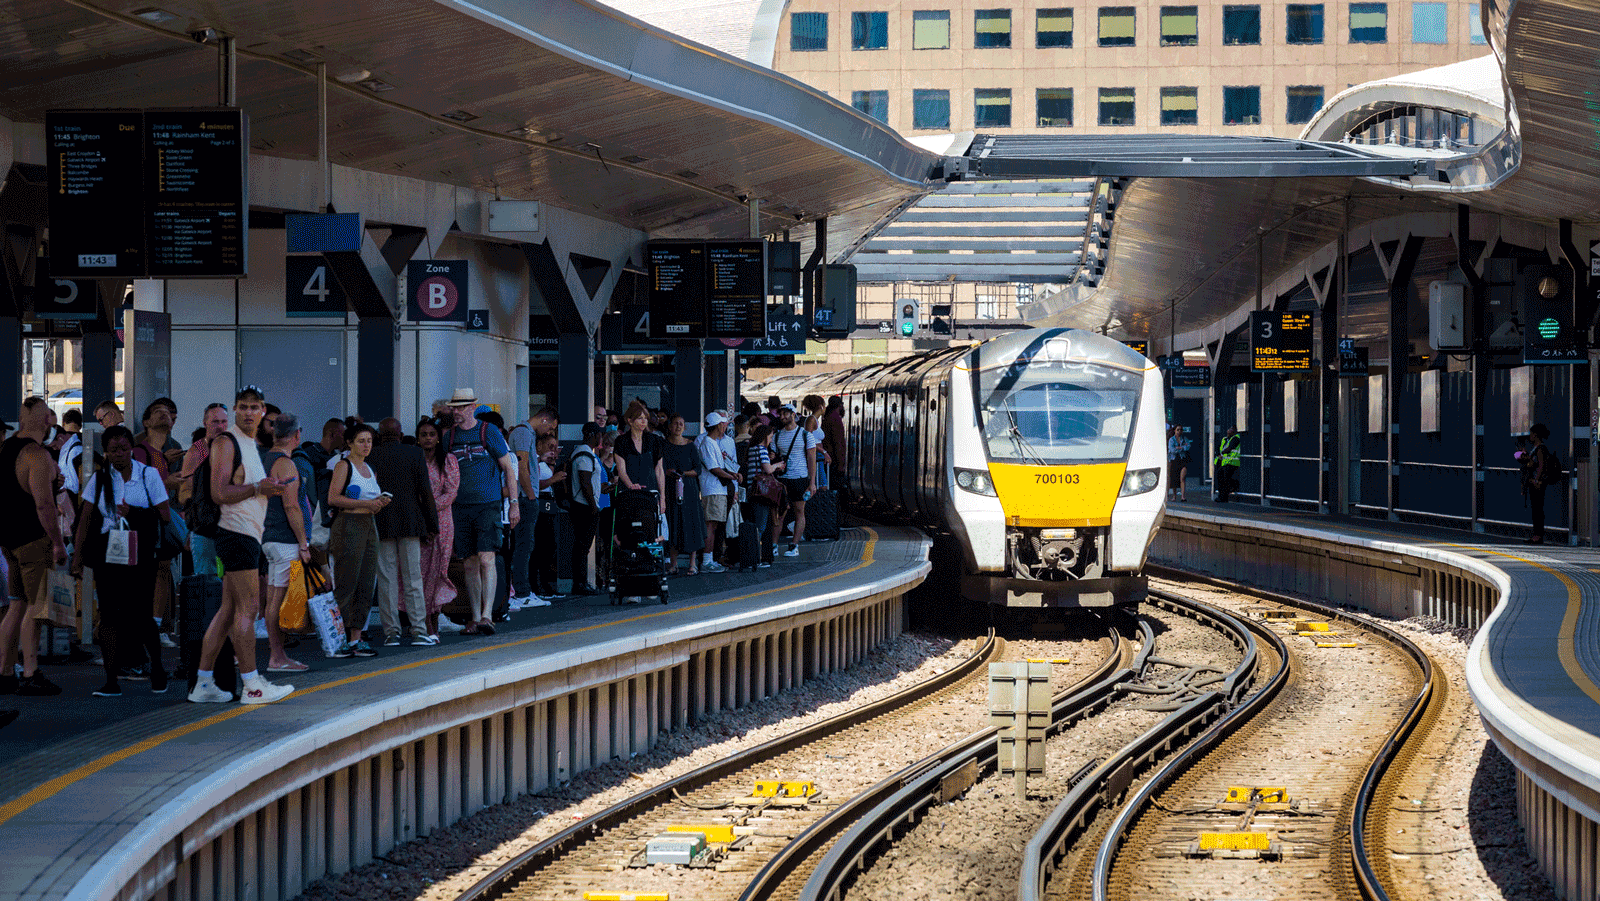 Long-term rail strategy urged as passenger numbers expected to double by 2050